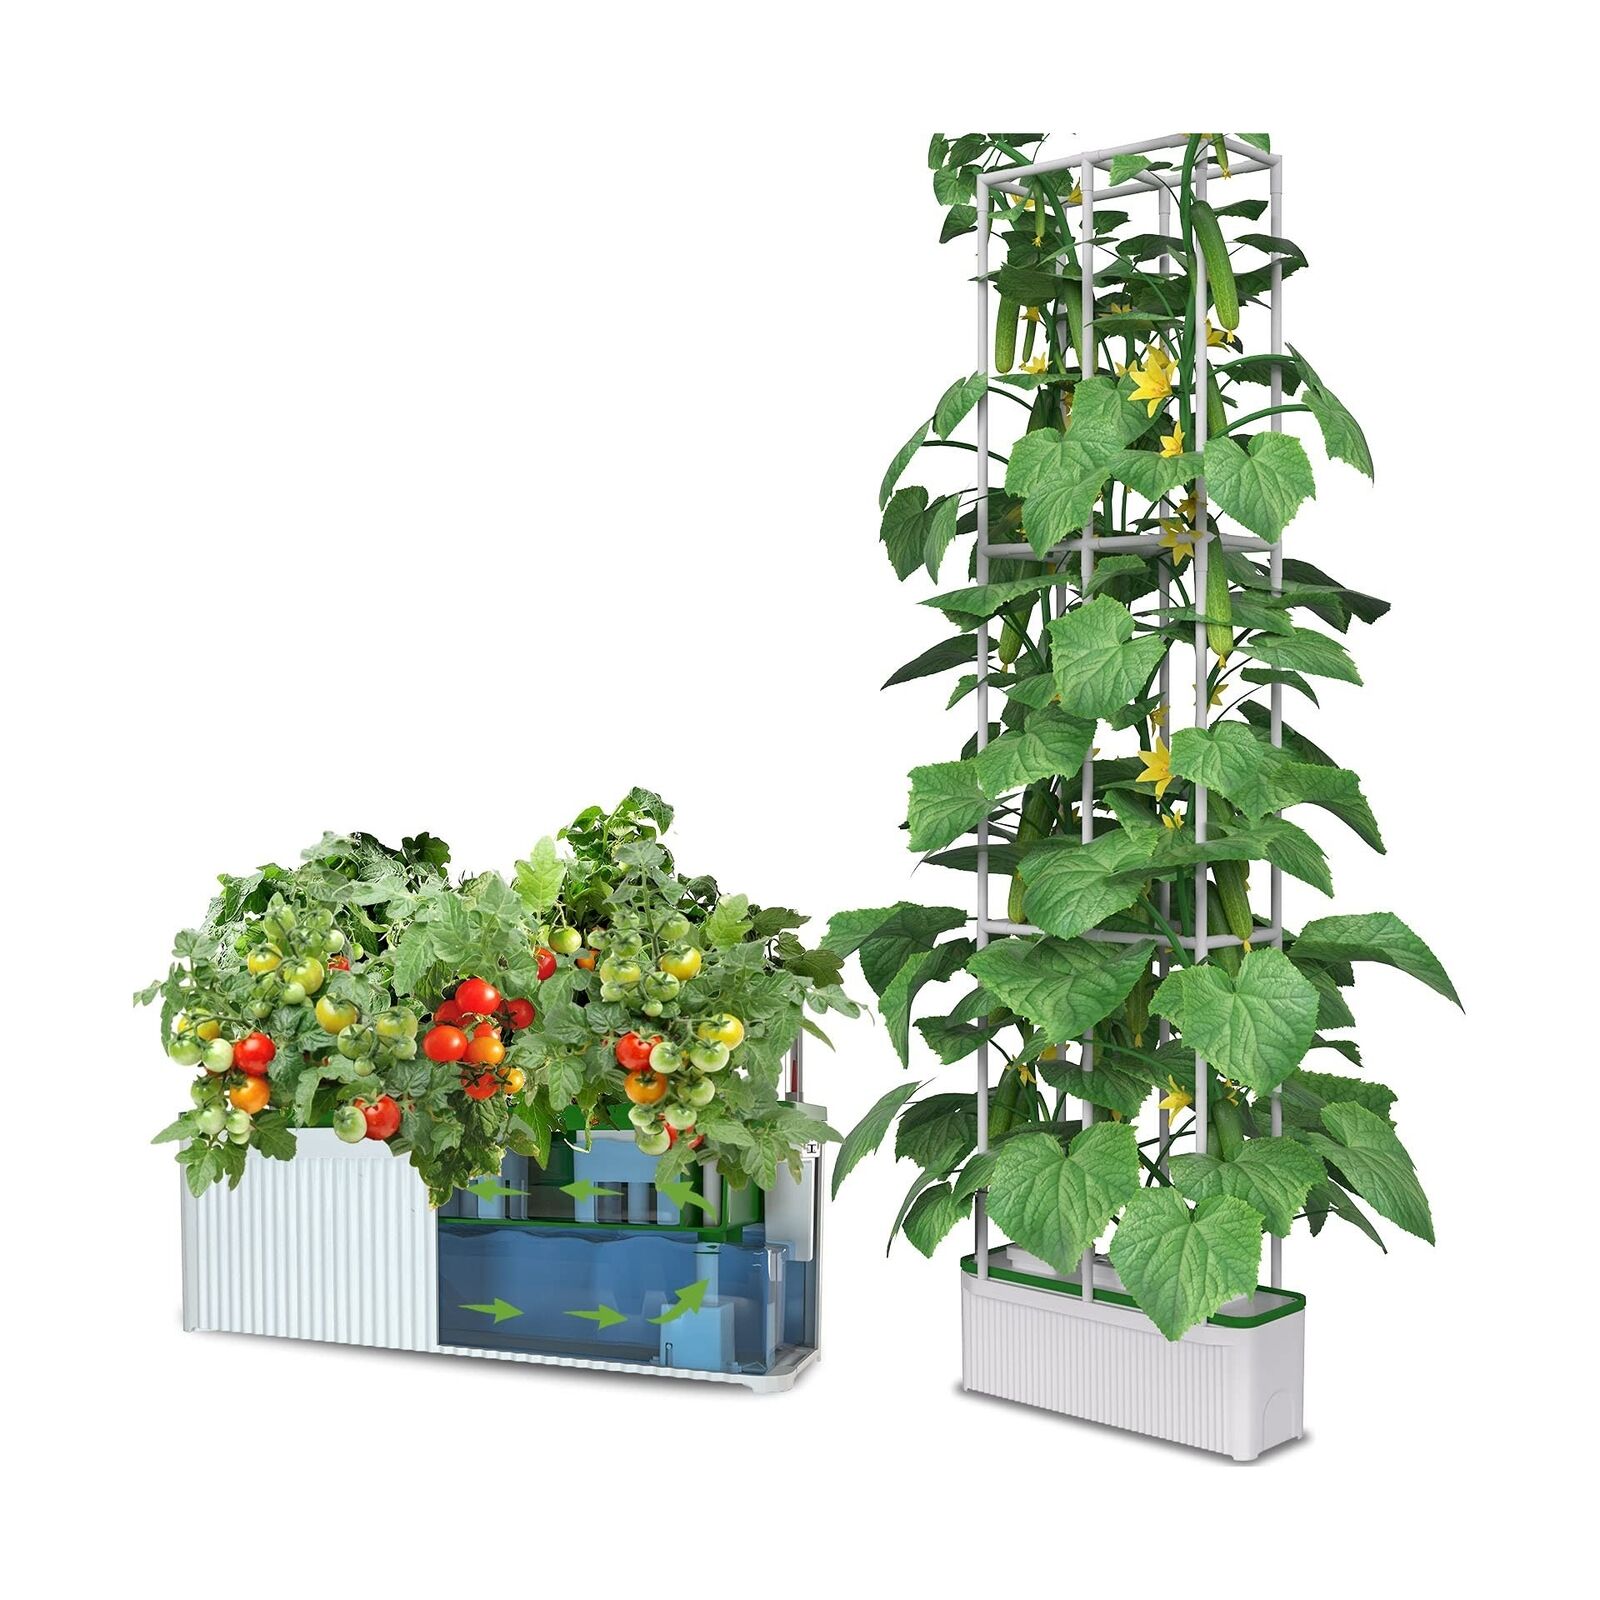 Smart Hydroponic Growing System,7L Indoor Hydroponic Garden Kit for Herb,Zucc...